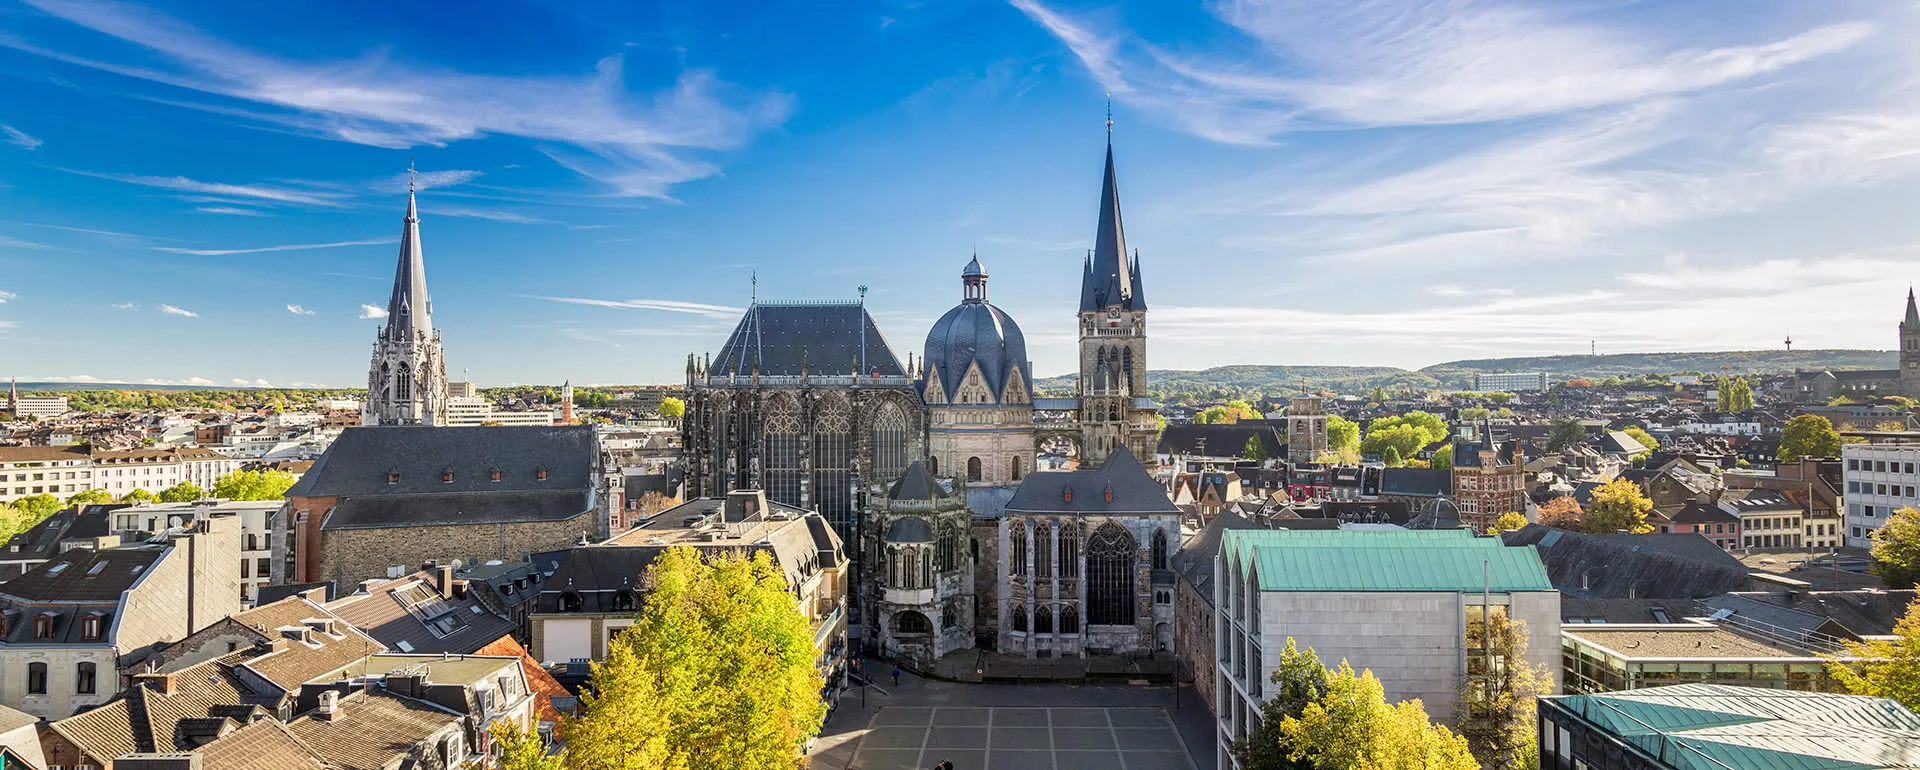 Aachen - the destination with youth hostels